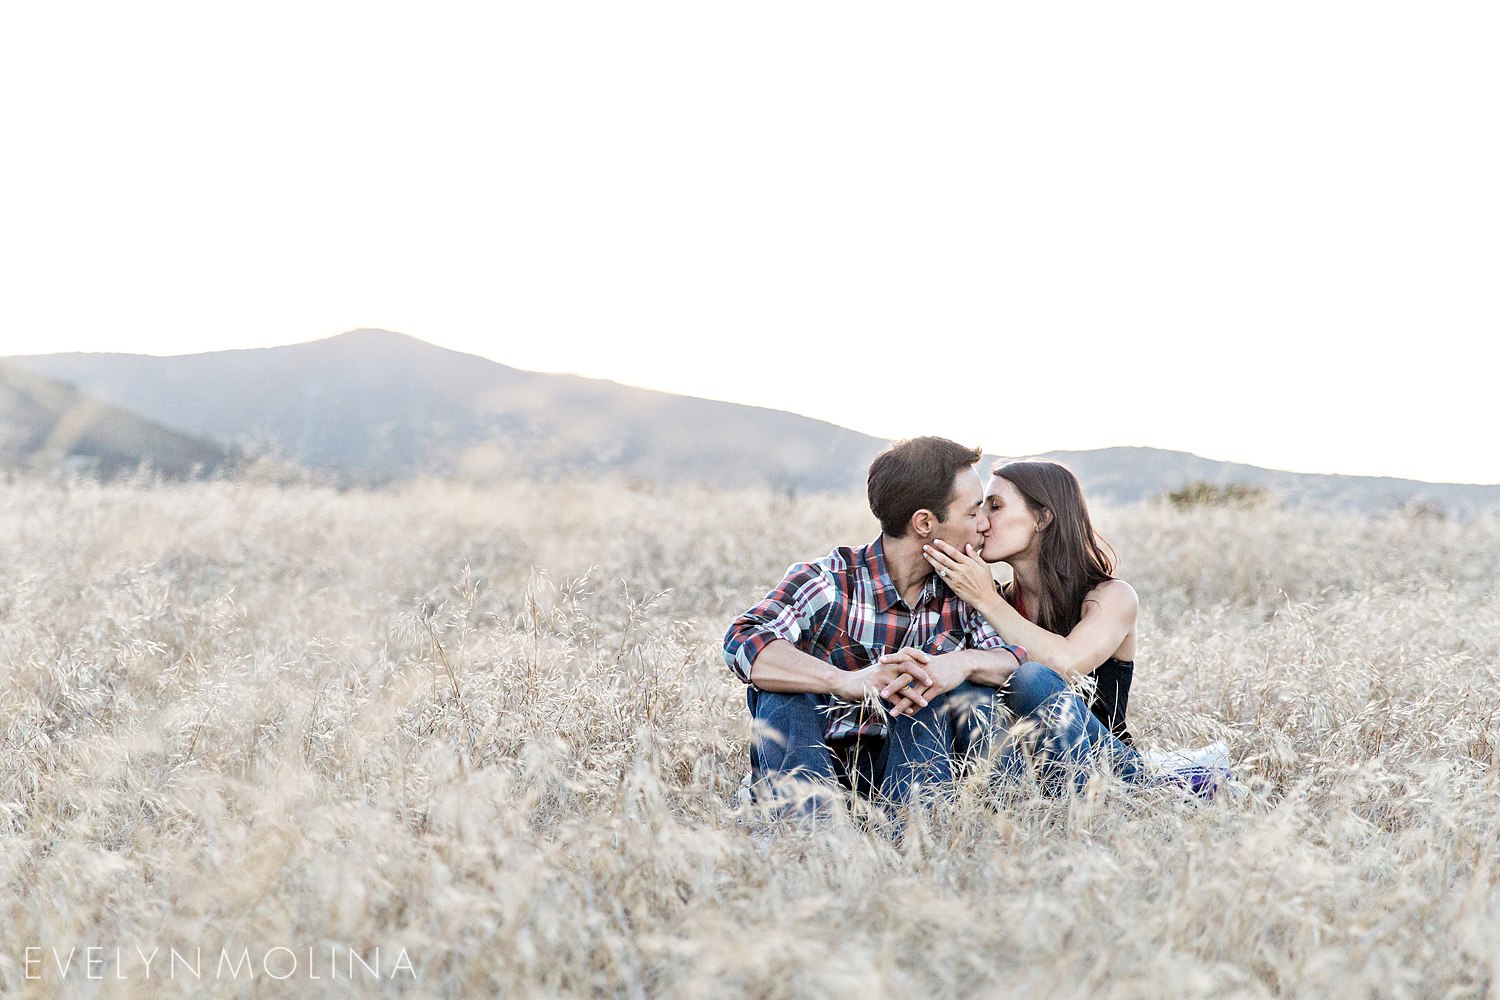 Mission Trails Engagement - Evelyn Molina Photography_022.jpg